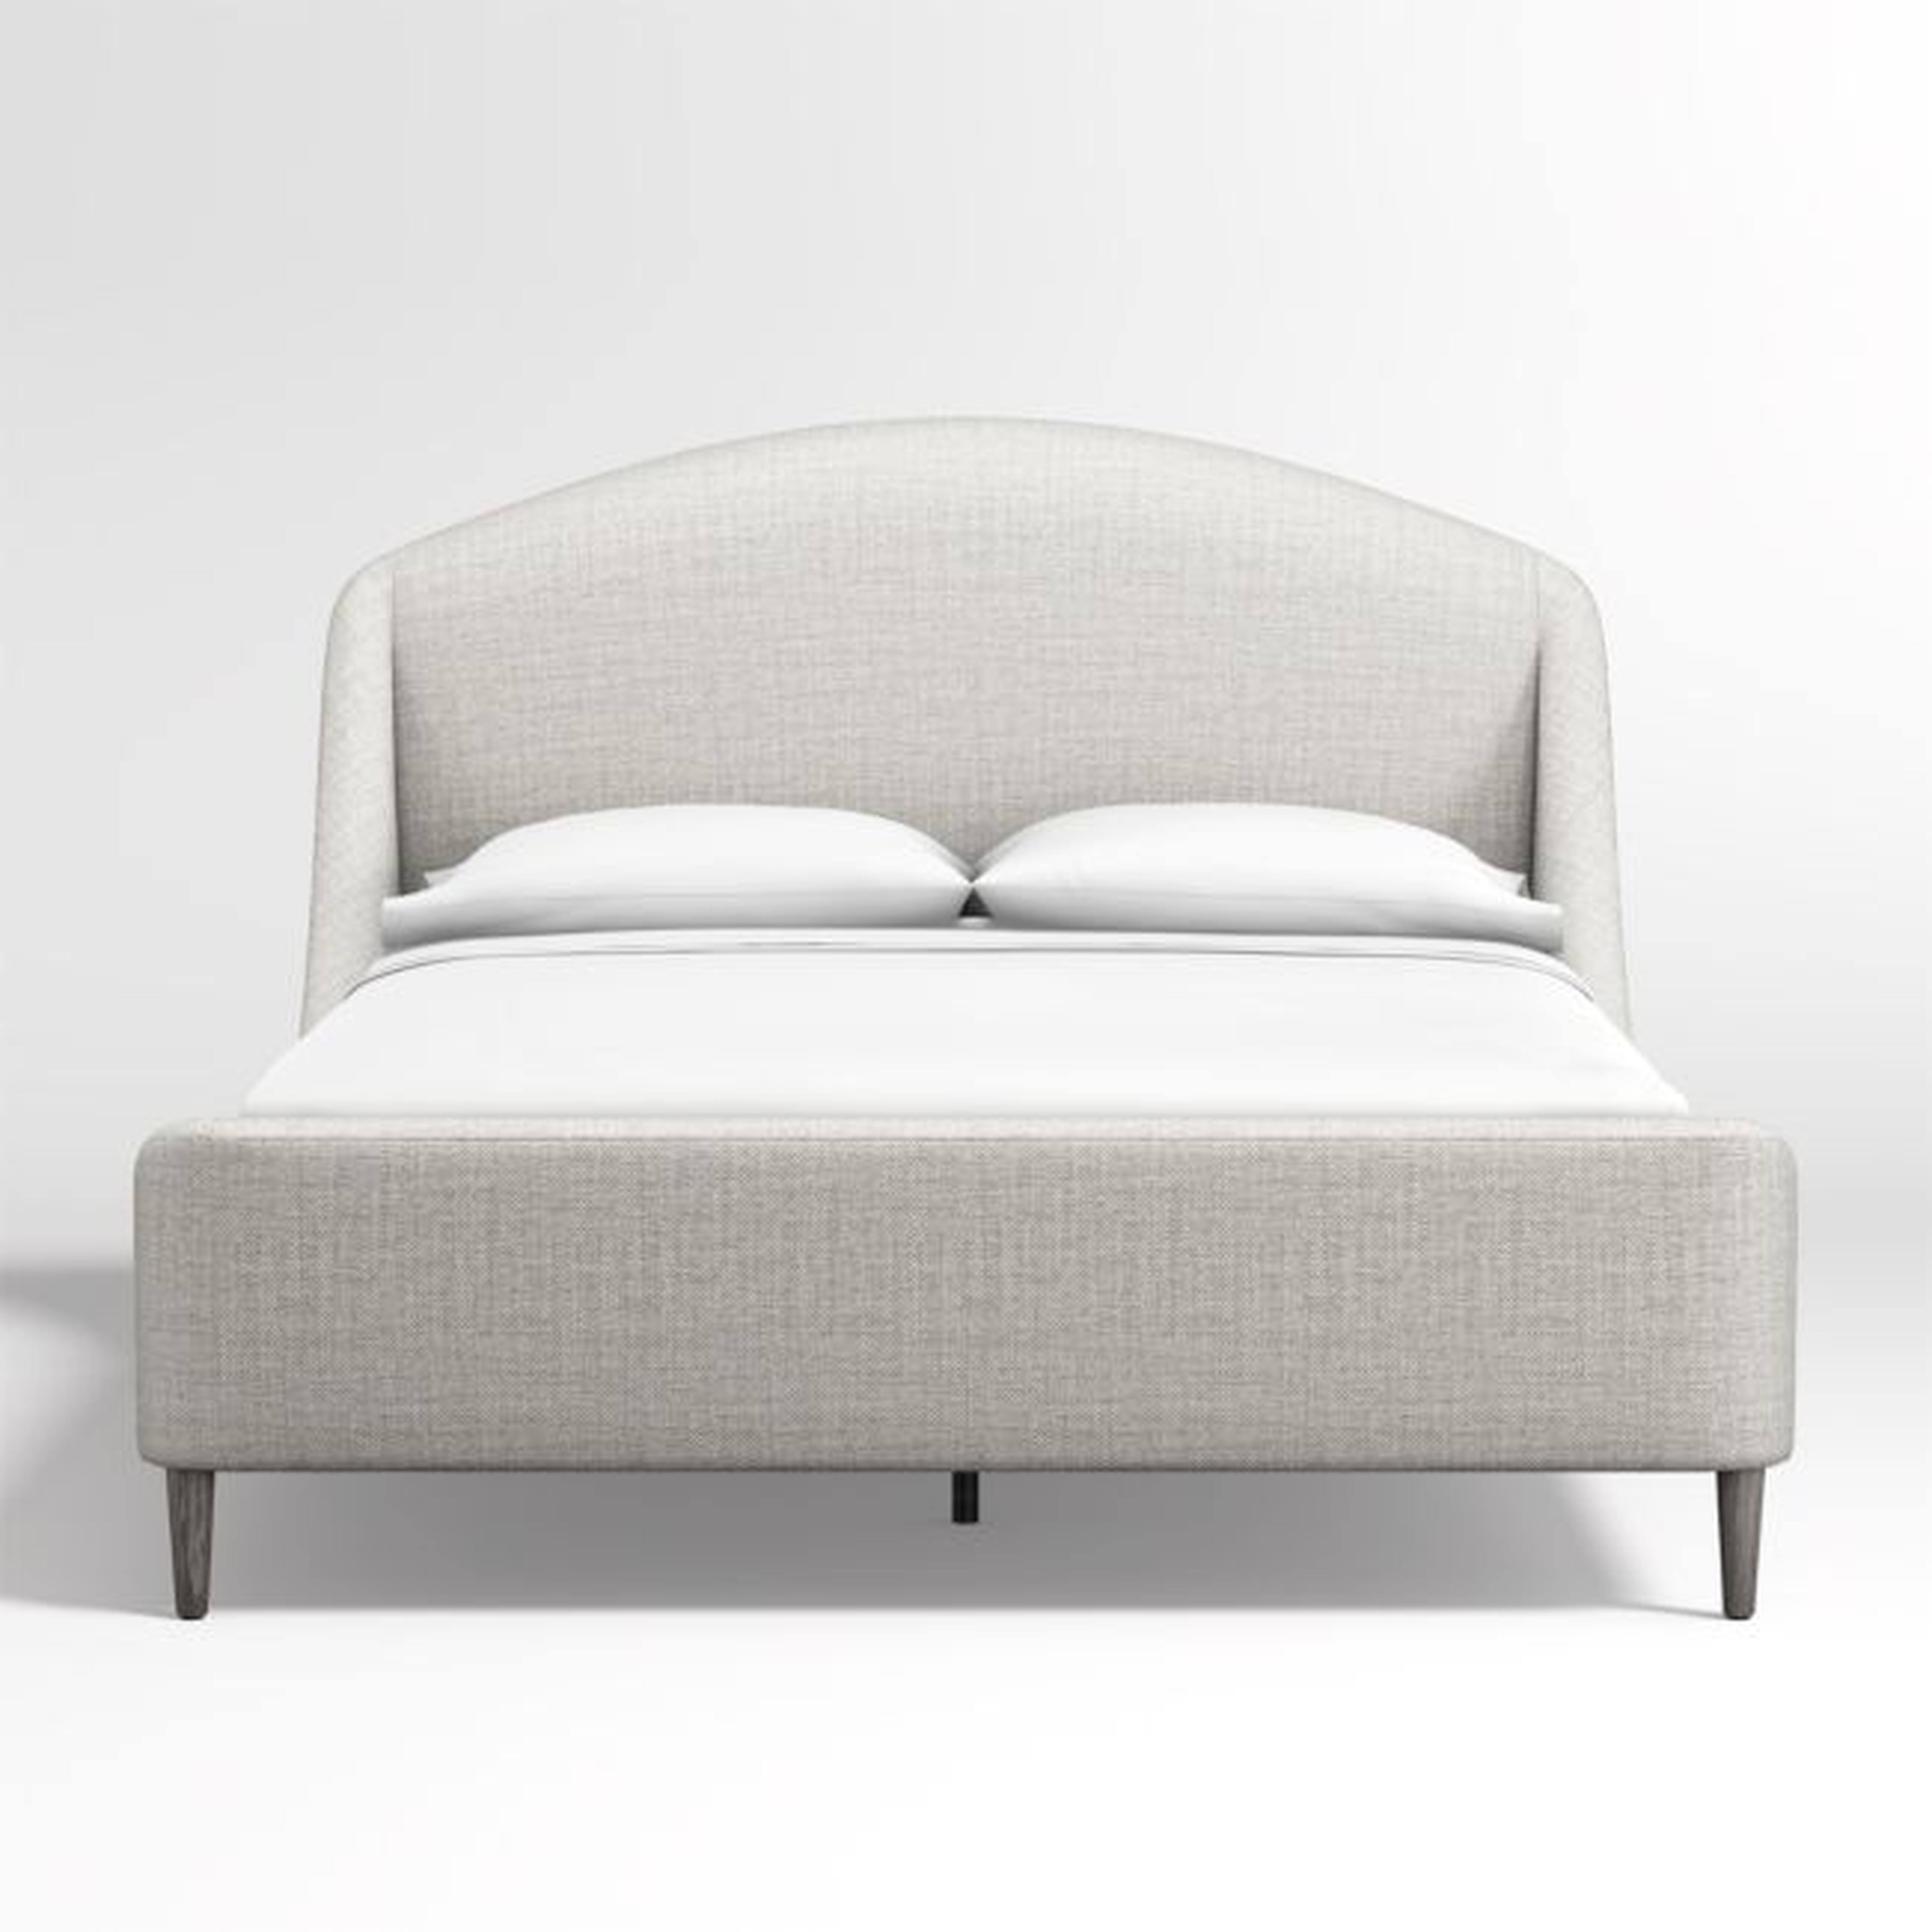 Lafayette Mist Upholstered Queen Bed - Crate and Barrel